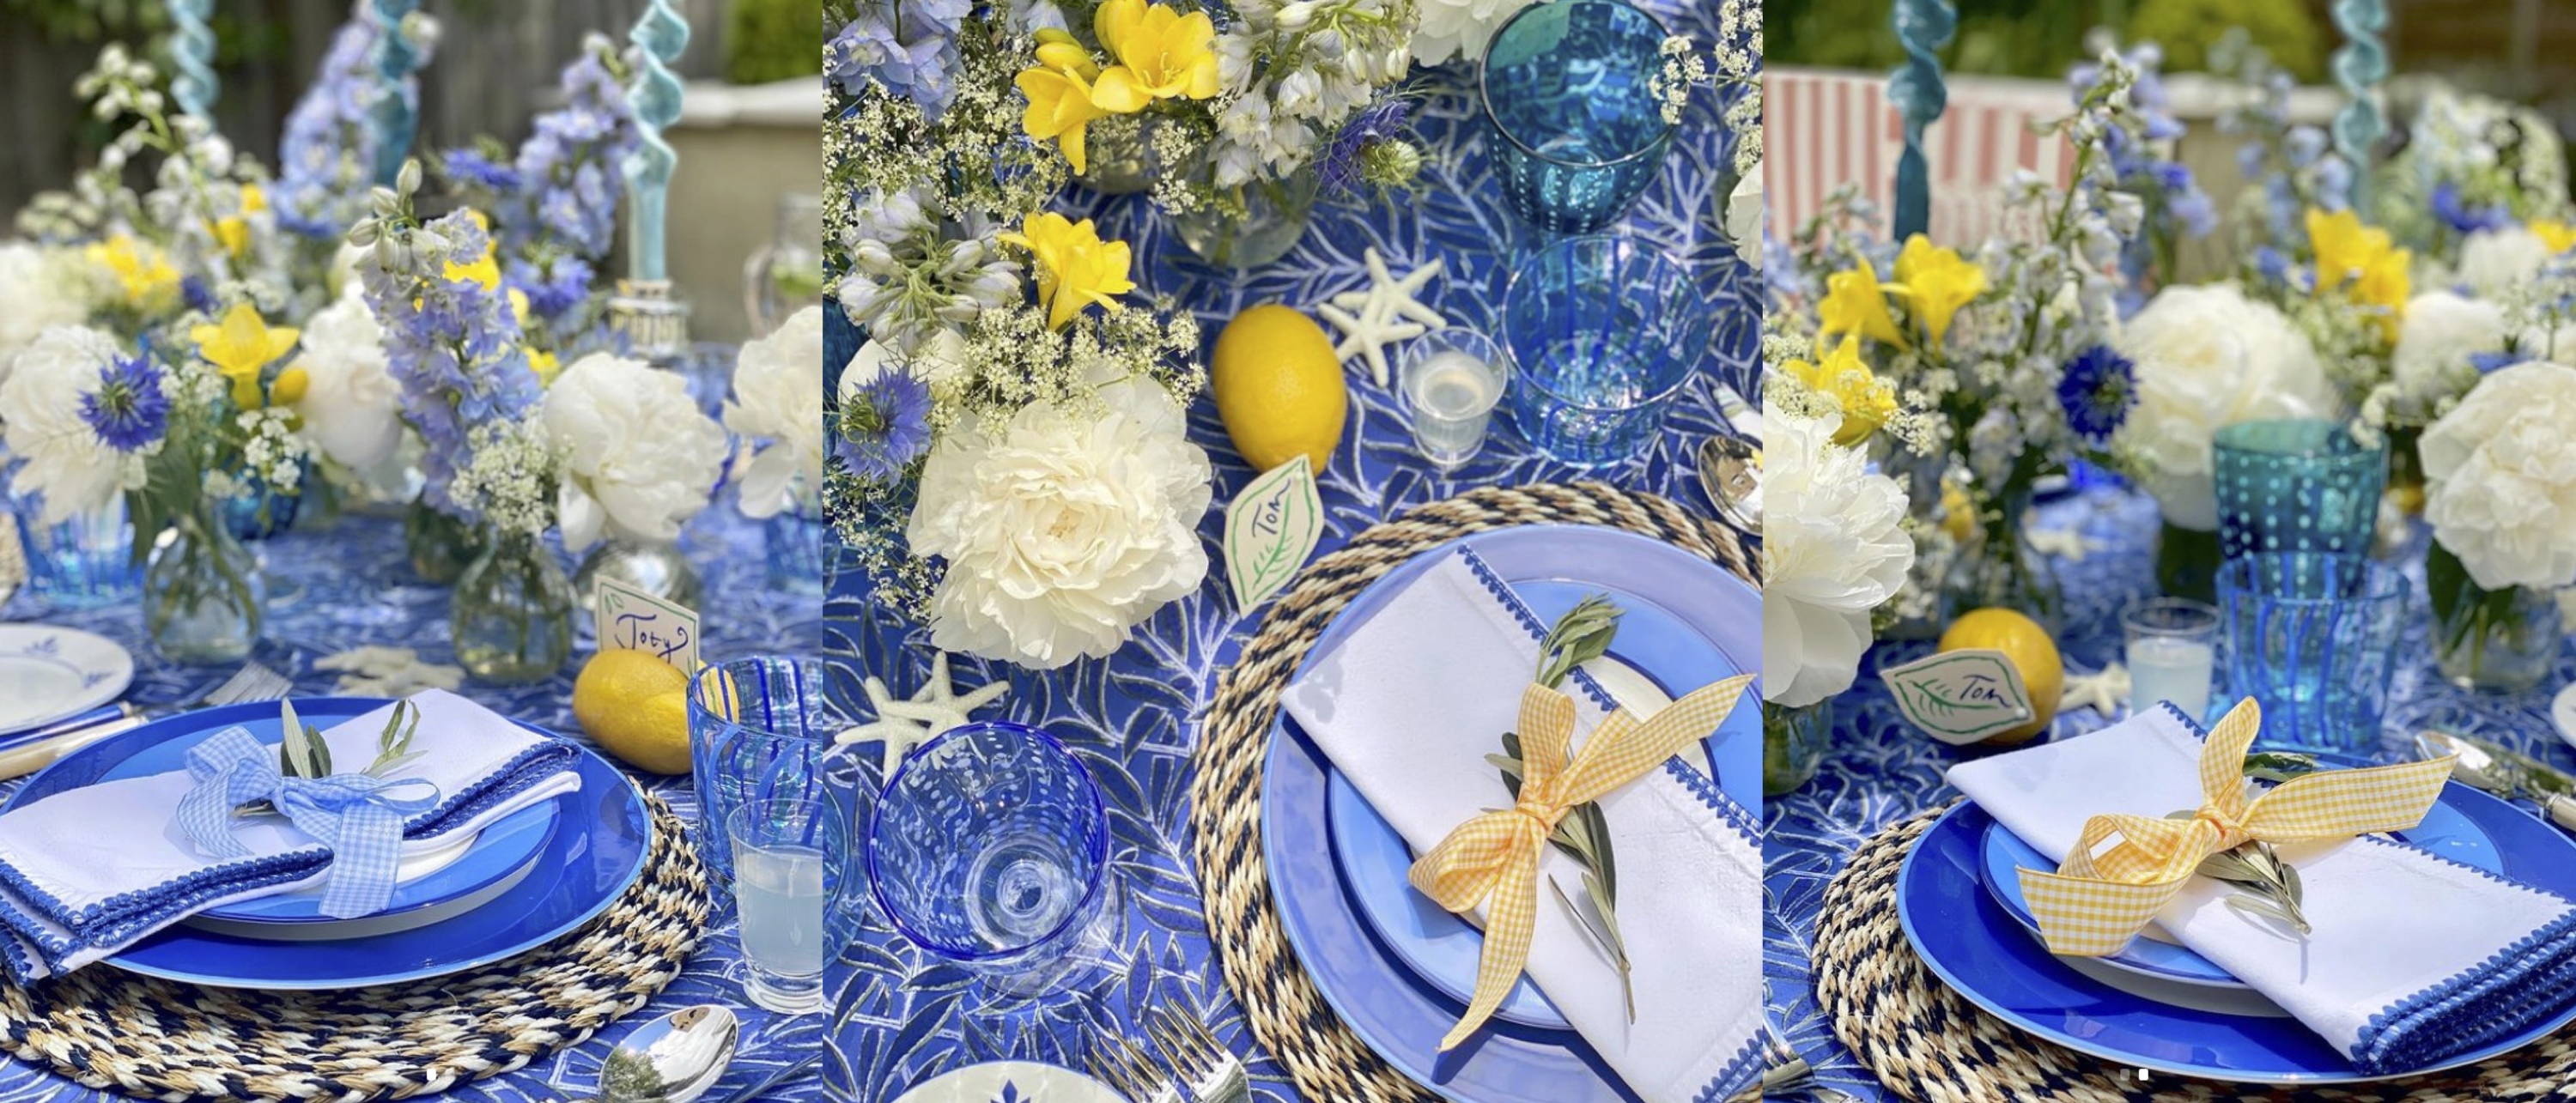 Bright fiesta themed tablescape with beatiful fresh flowers